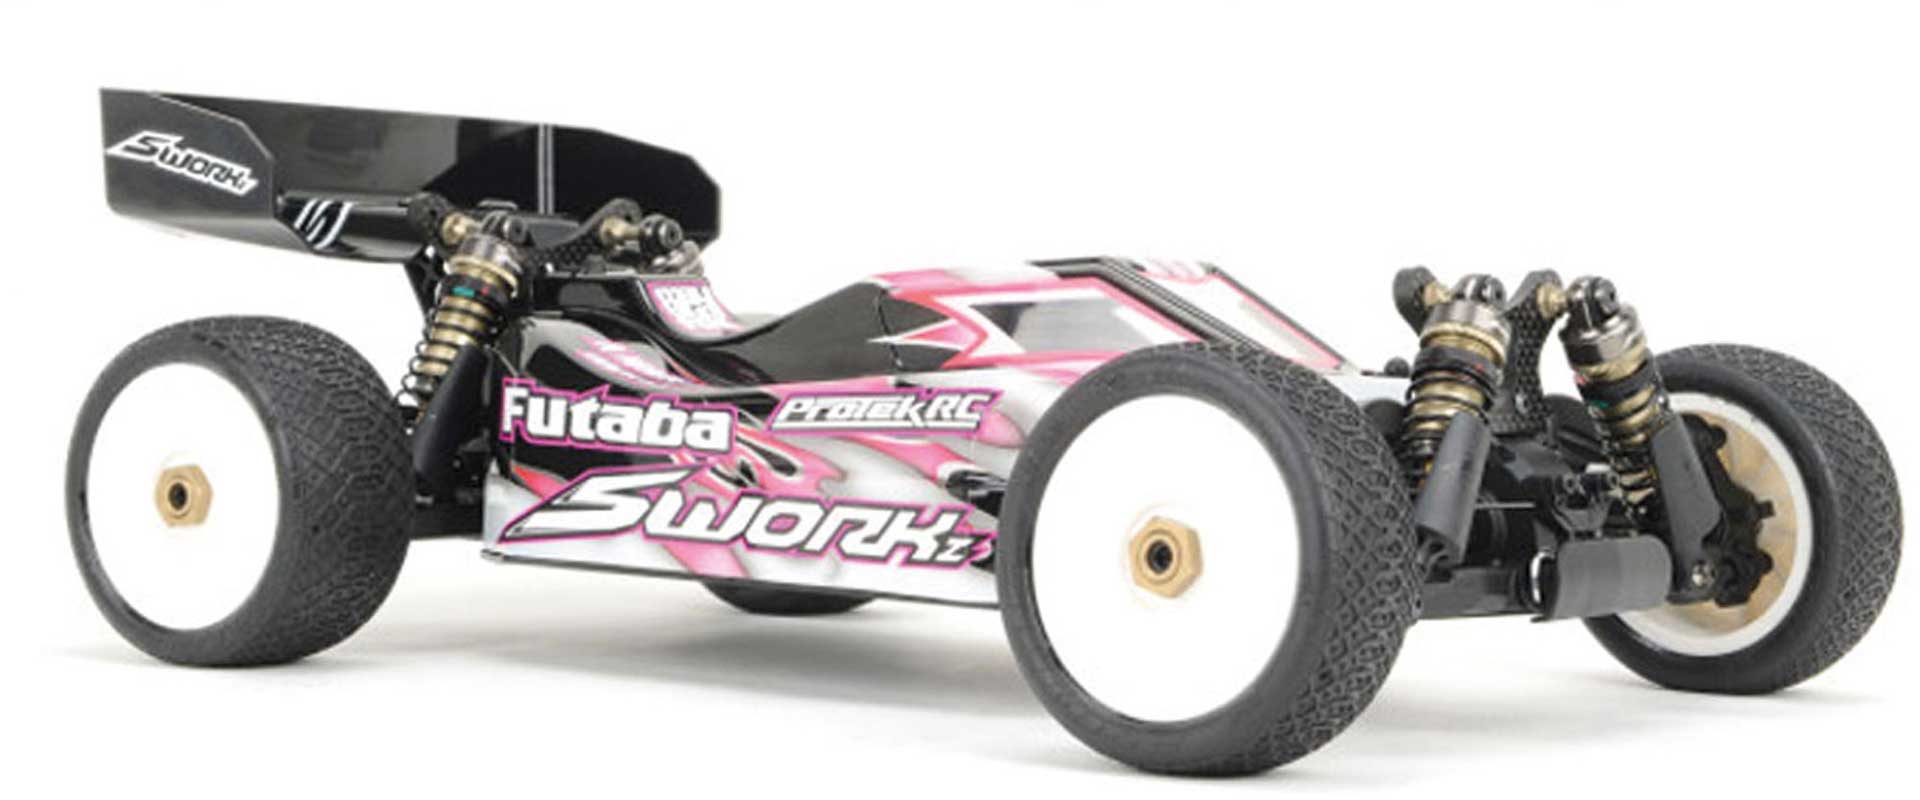 SWORKZ S14-2 1/10 OFF-ROAD RACING BUGGY PRO KIT ELECTRO  4WD